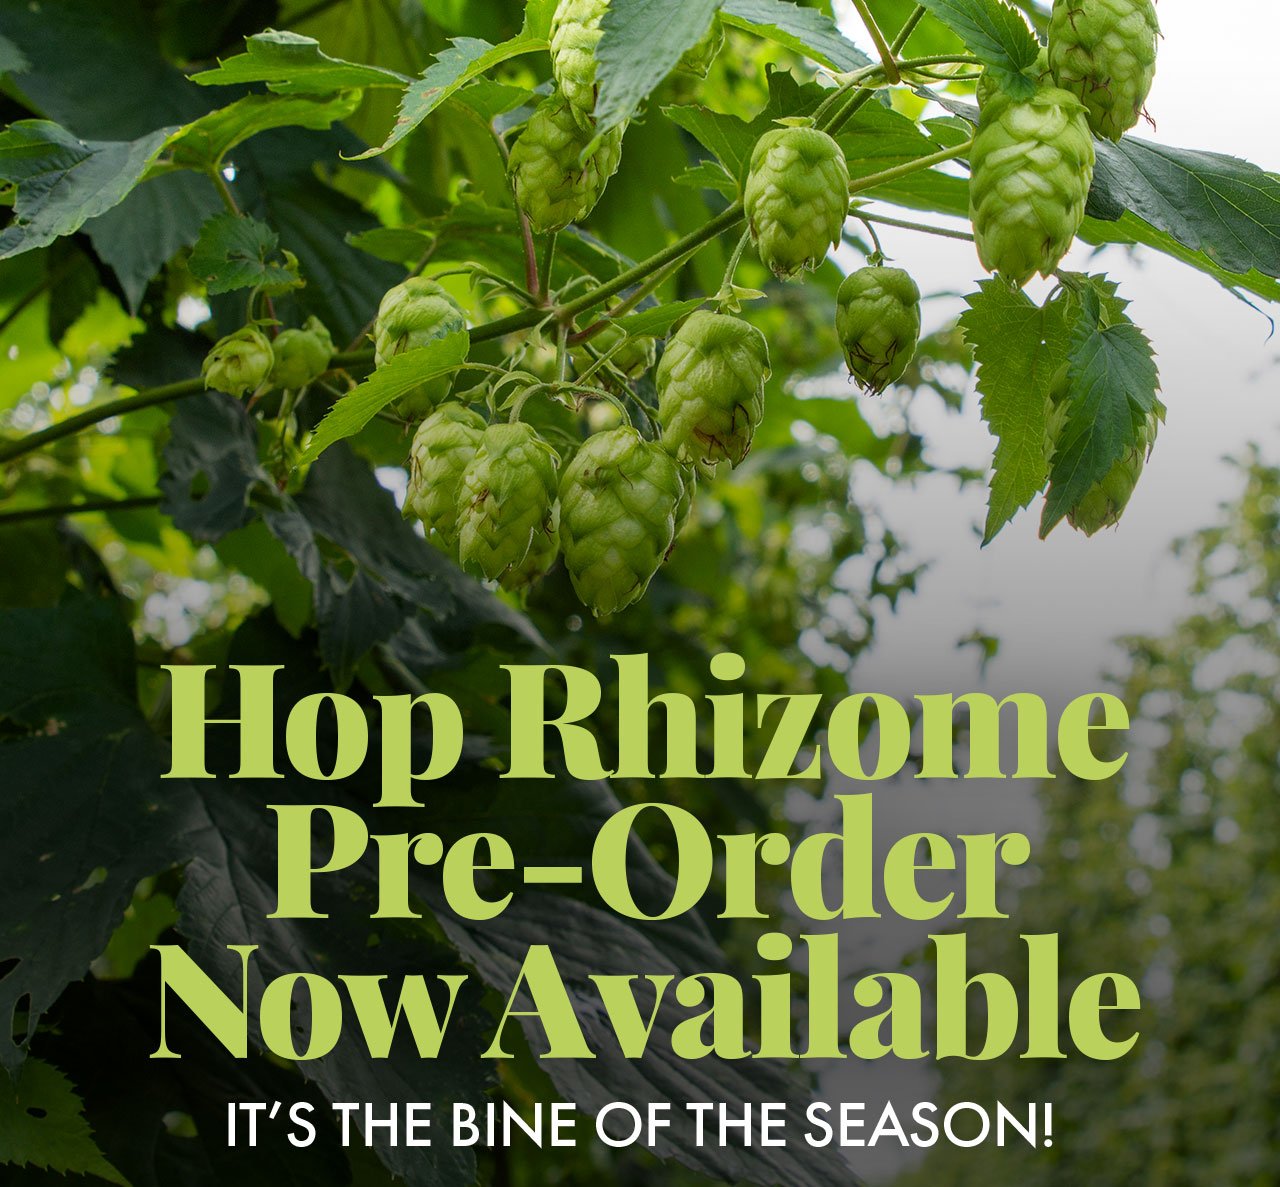 Hop Rhizome Pre-Order Now Available. It’s the Bine of the Season.